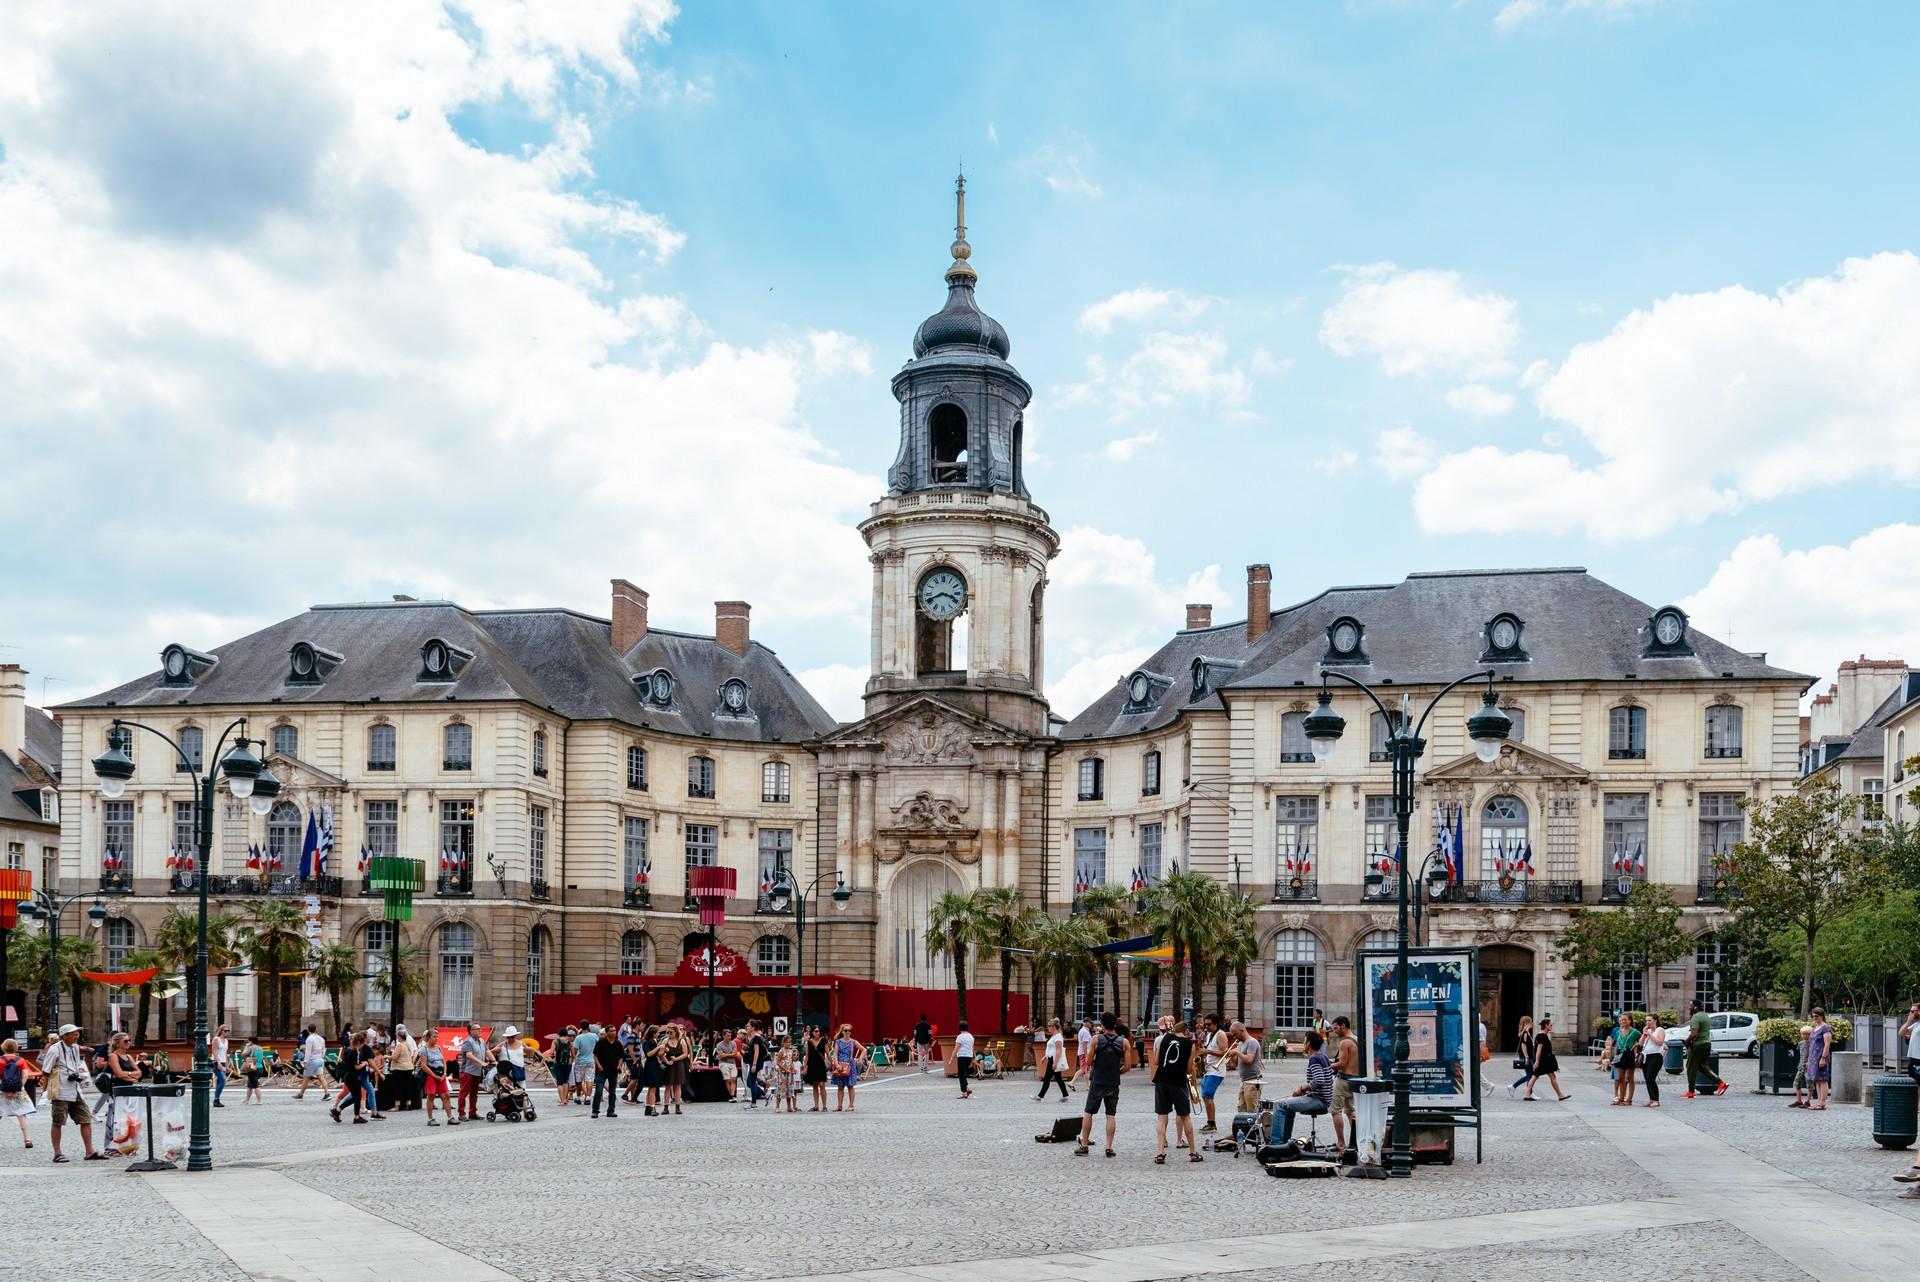 City square in Rennes in partly cloudy weather